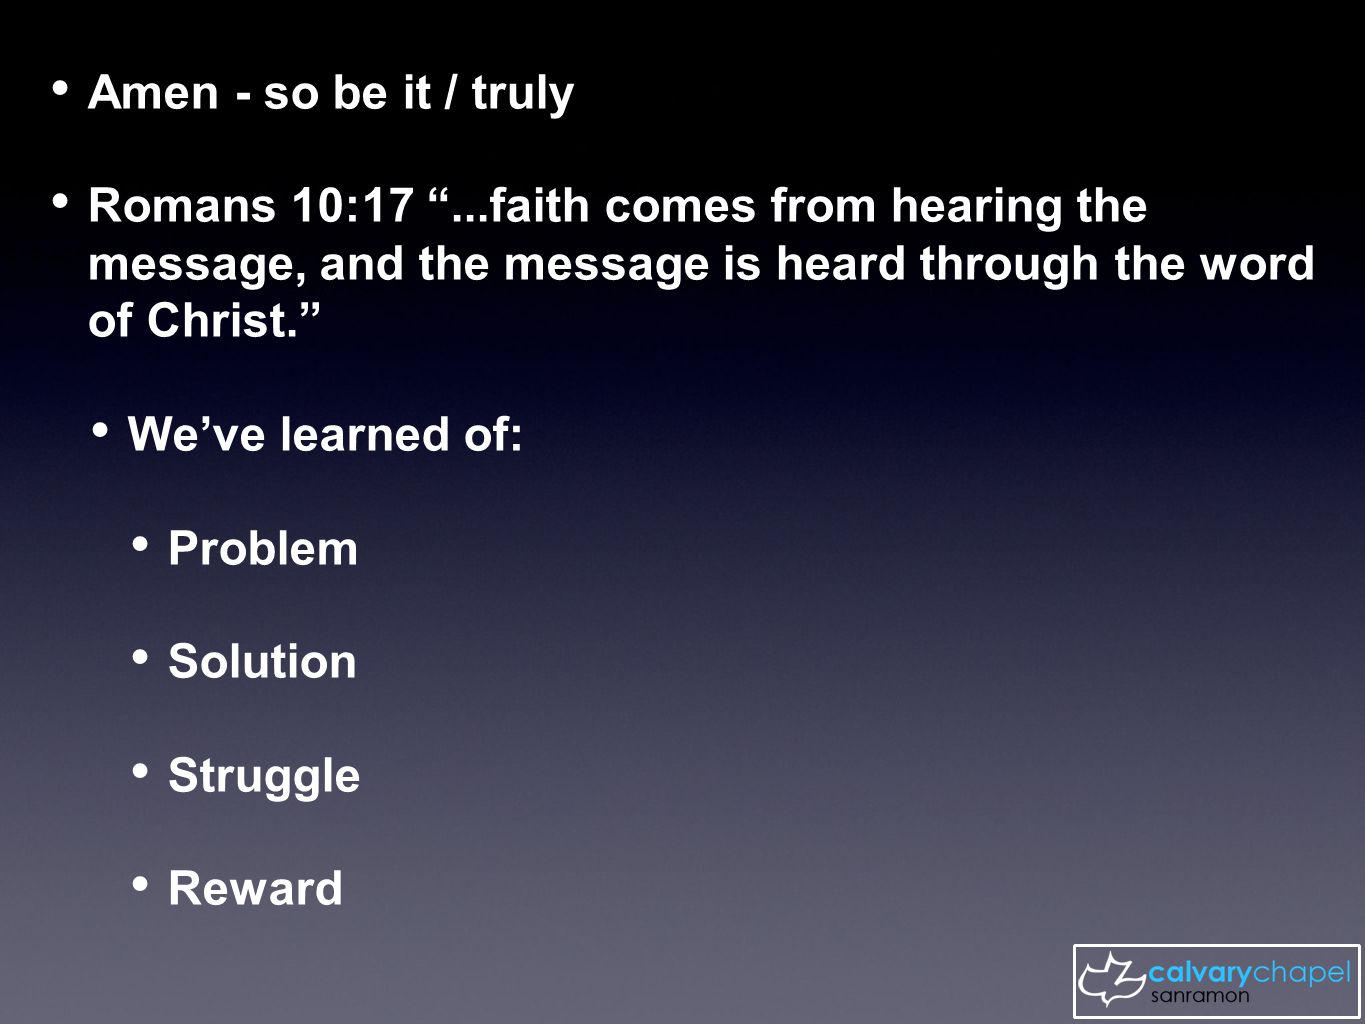 Amen - so be it / truly Romans 10:17 ...faith comes from hearing the message, and the message is heard through the word of Christ. We’ve learned of: Problem Solution Struggle Reward